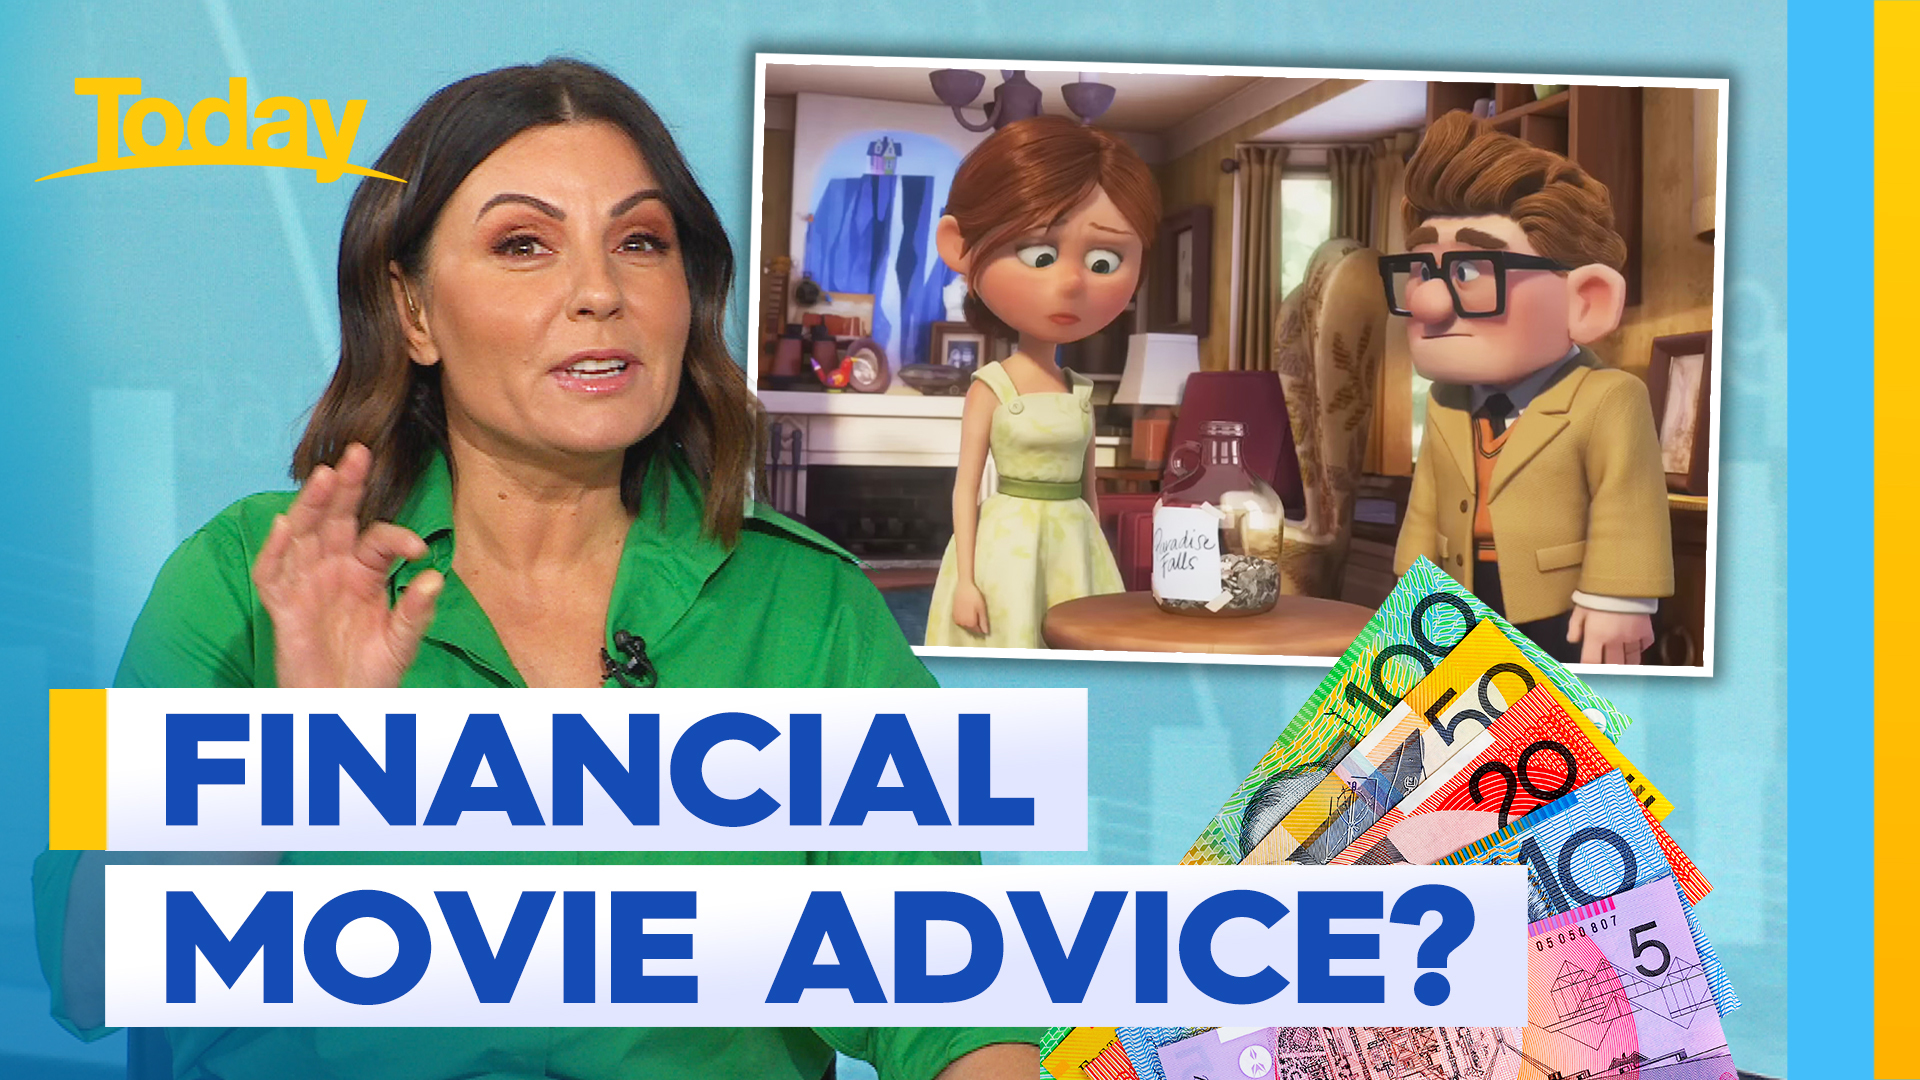 Can you really get good financial advice from the movies?